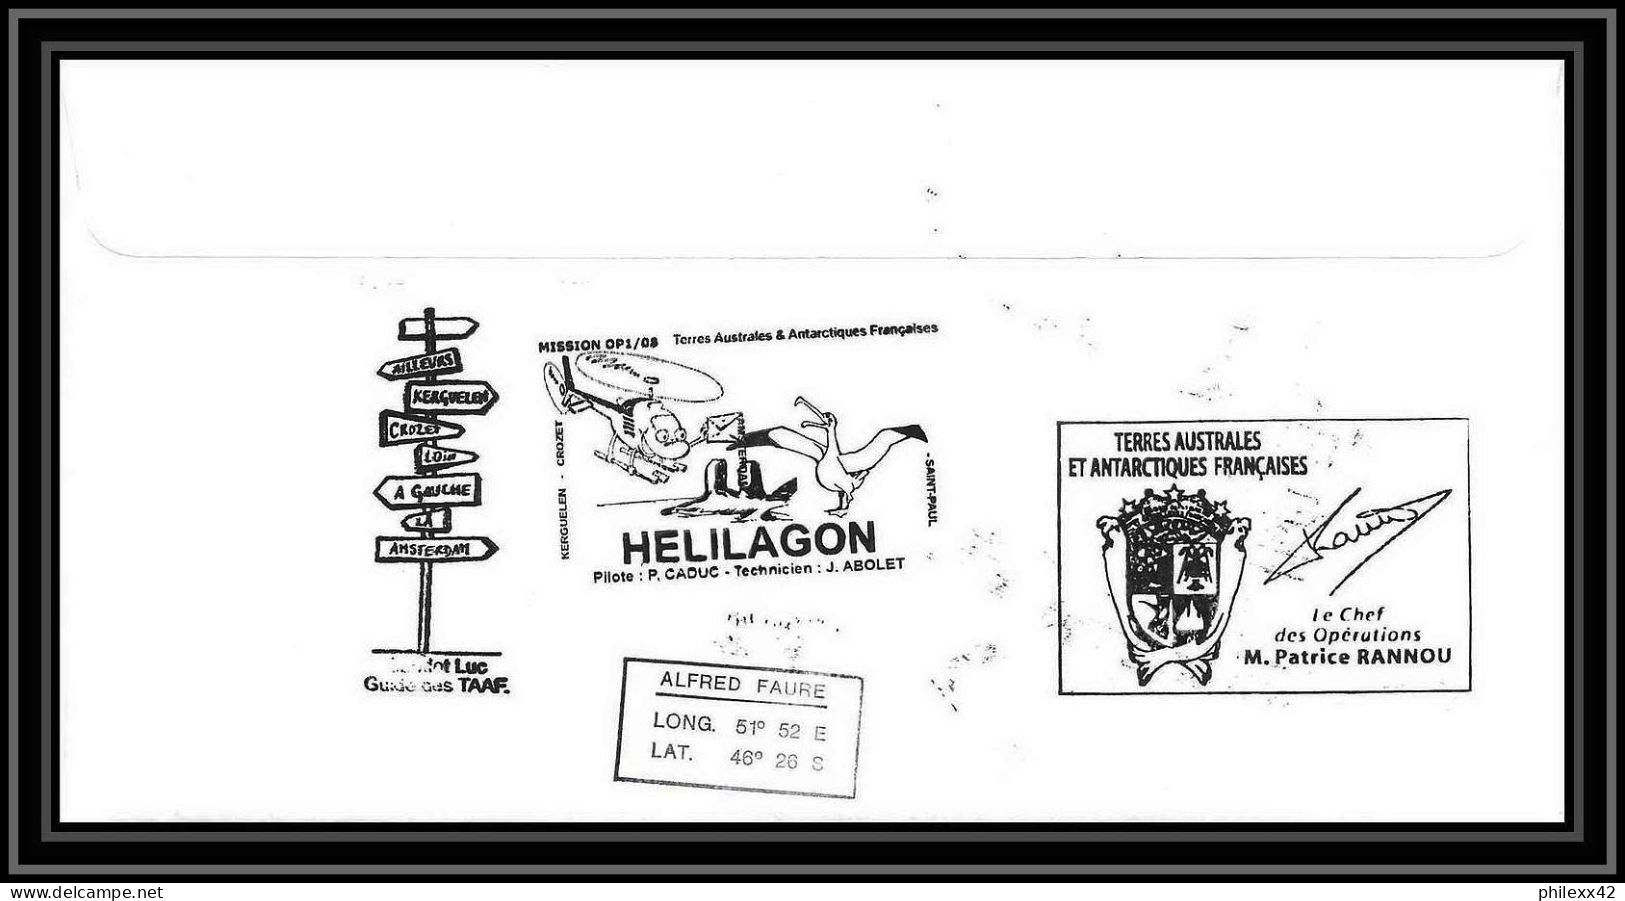 2778 Helilagon Terres Australes TAAF Lettre Cover Dufresne 2 Signé Signed Op 2008/1 Crozet N°508 8/4/2008 Sea Elephant - Helicopters